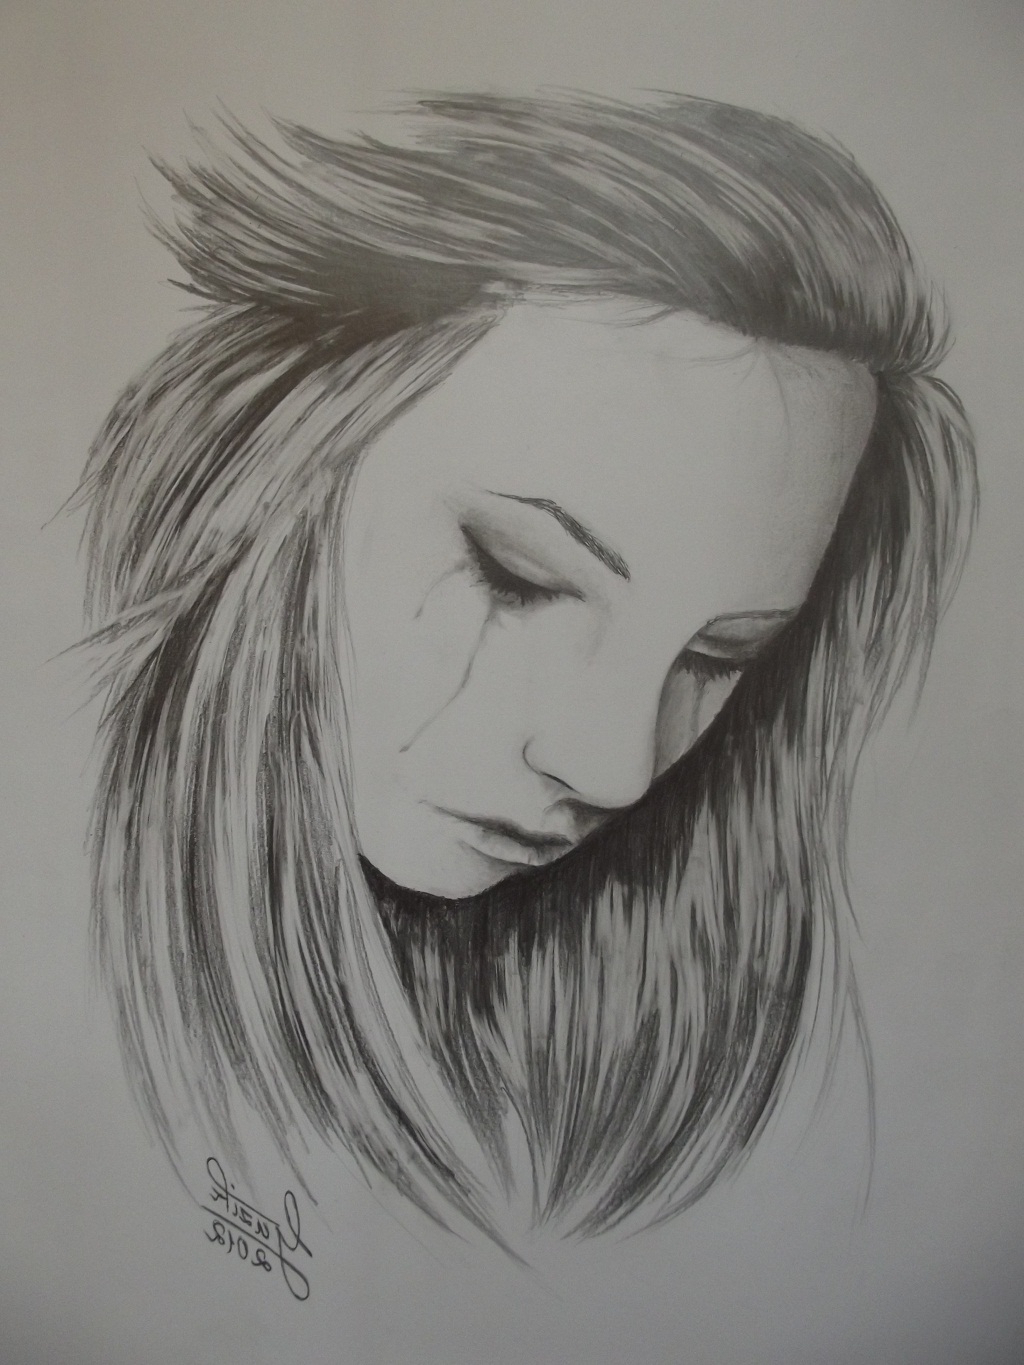 Simple Drawings Of Sketches Of Sadness with Realistic